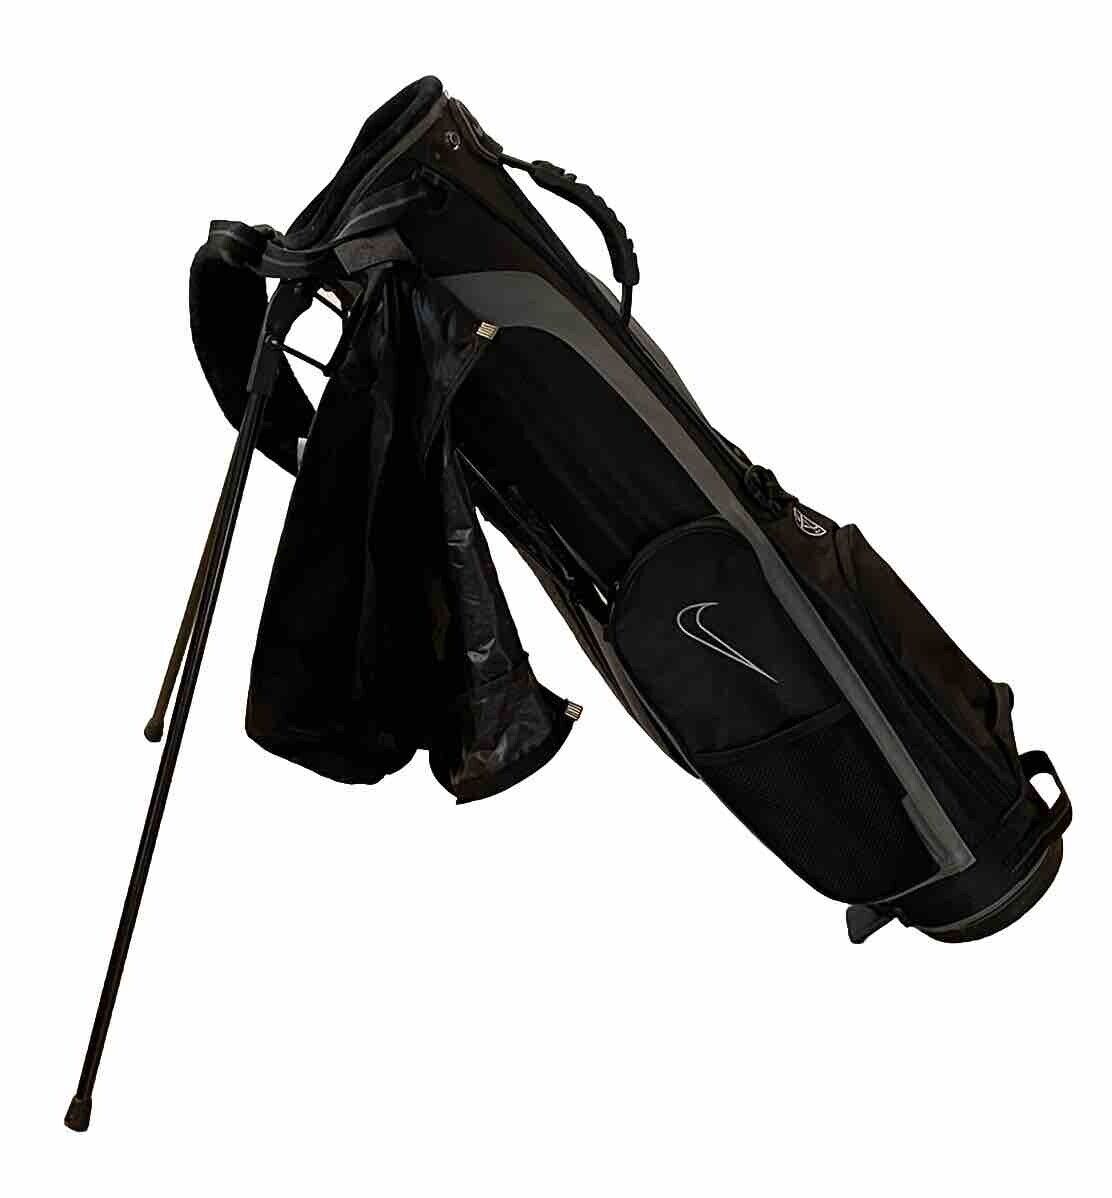 NWT Nike Pro Combo Day Bag Black Stand Carry 3 Way With Rain Cover Golf Bag 34”